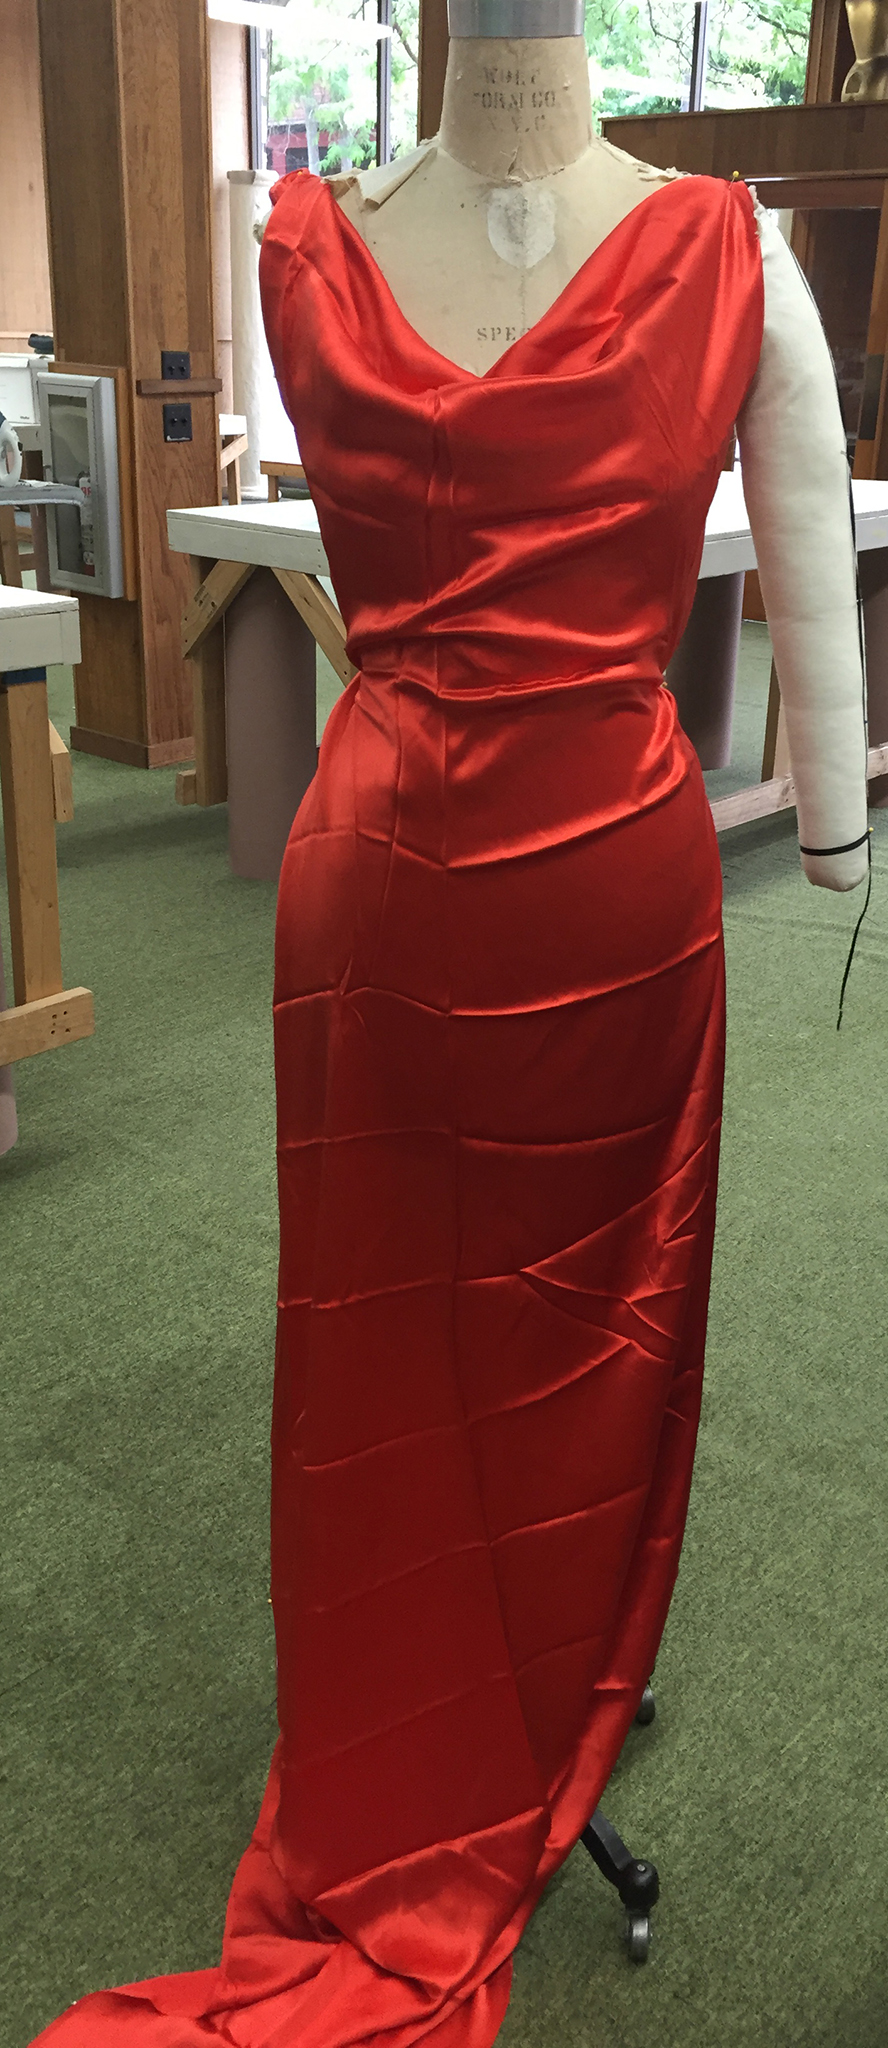 Red silk satin draped over a dress form.